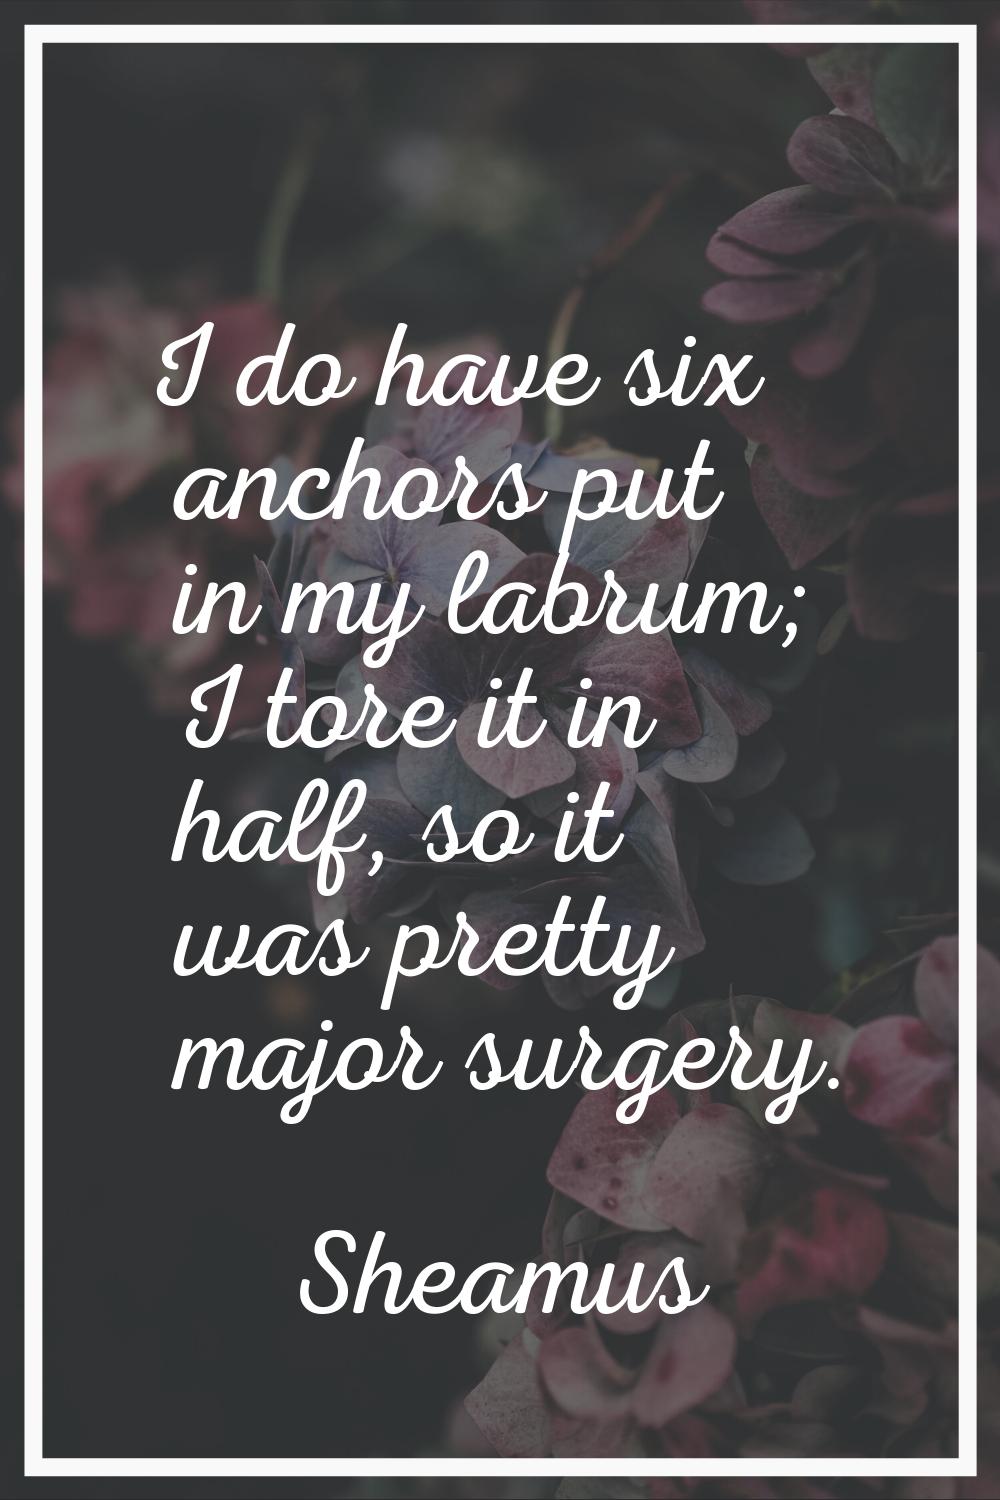 I do have six anchors put in my labrum; I tore it in half, so it was pretty major surgery.